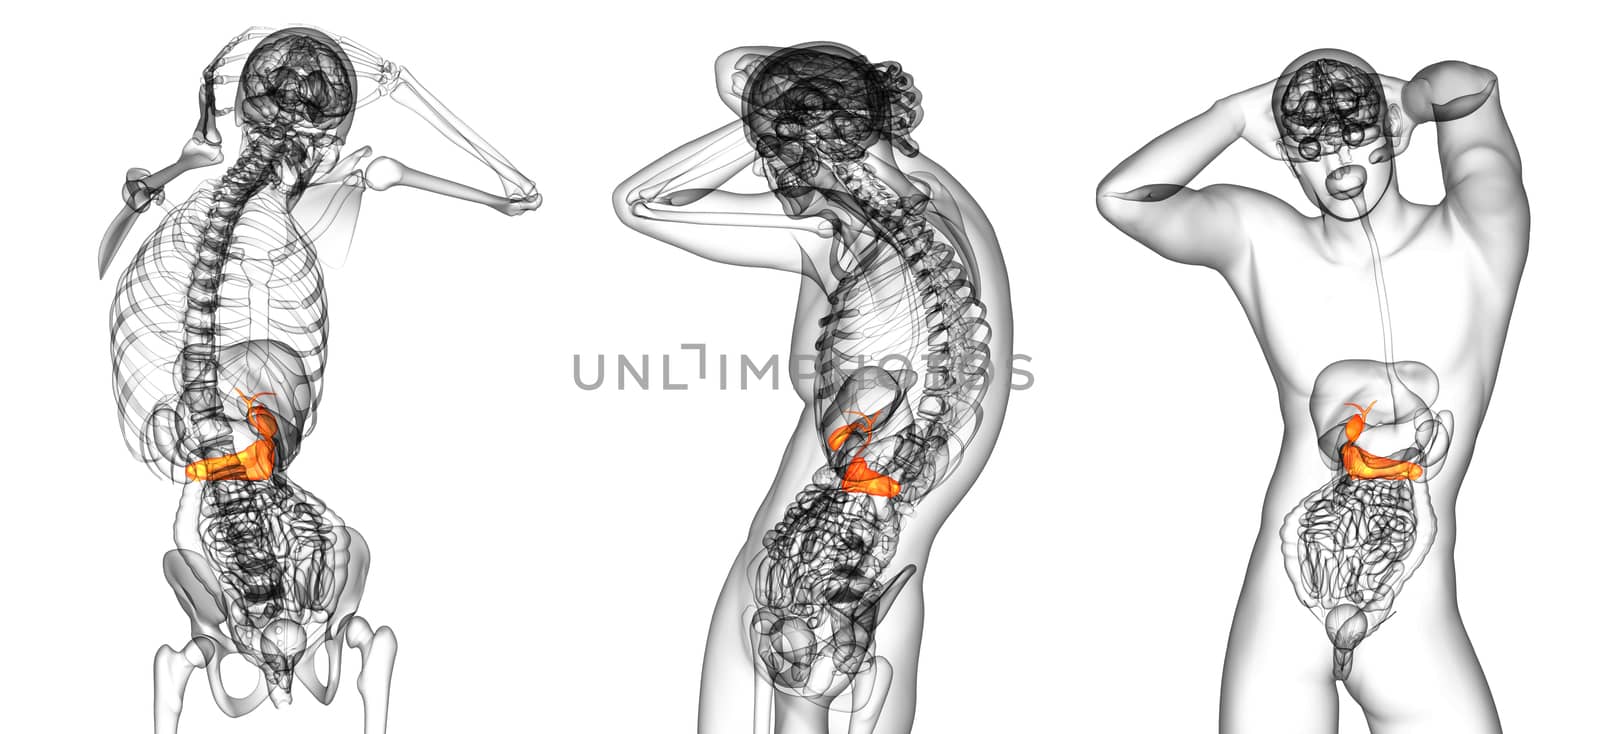 3d rendering medical illustration of the gallblader and pancreas by maya2008